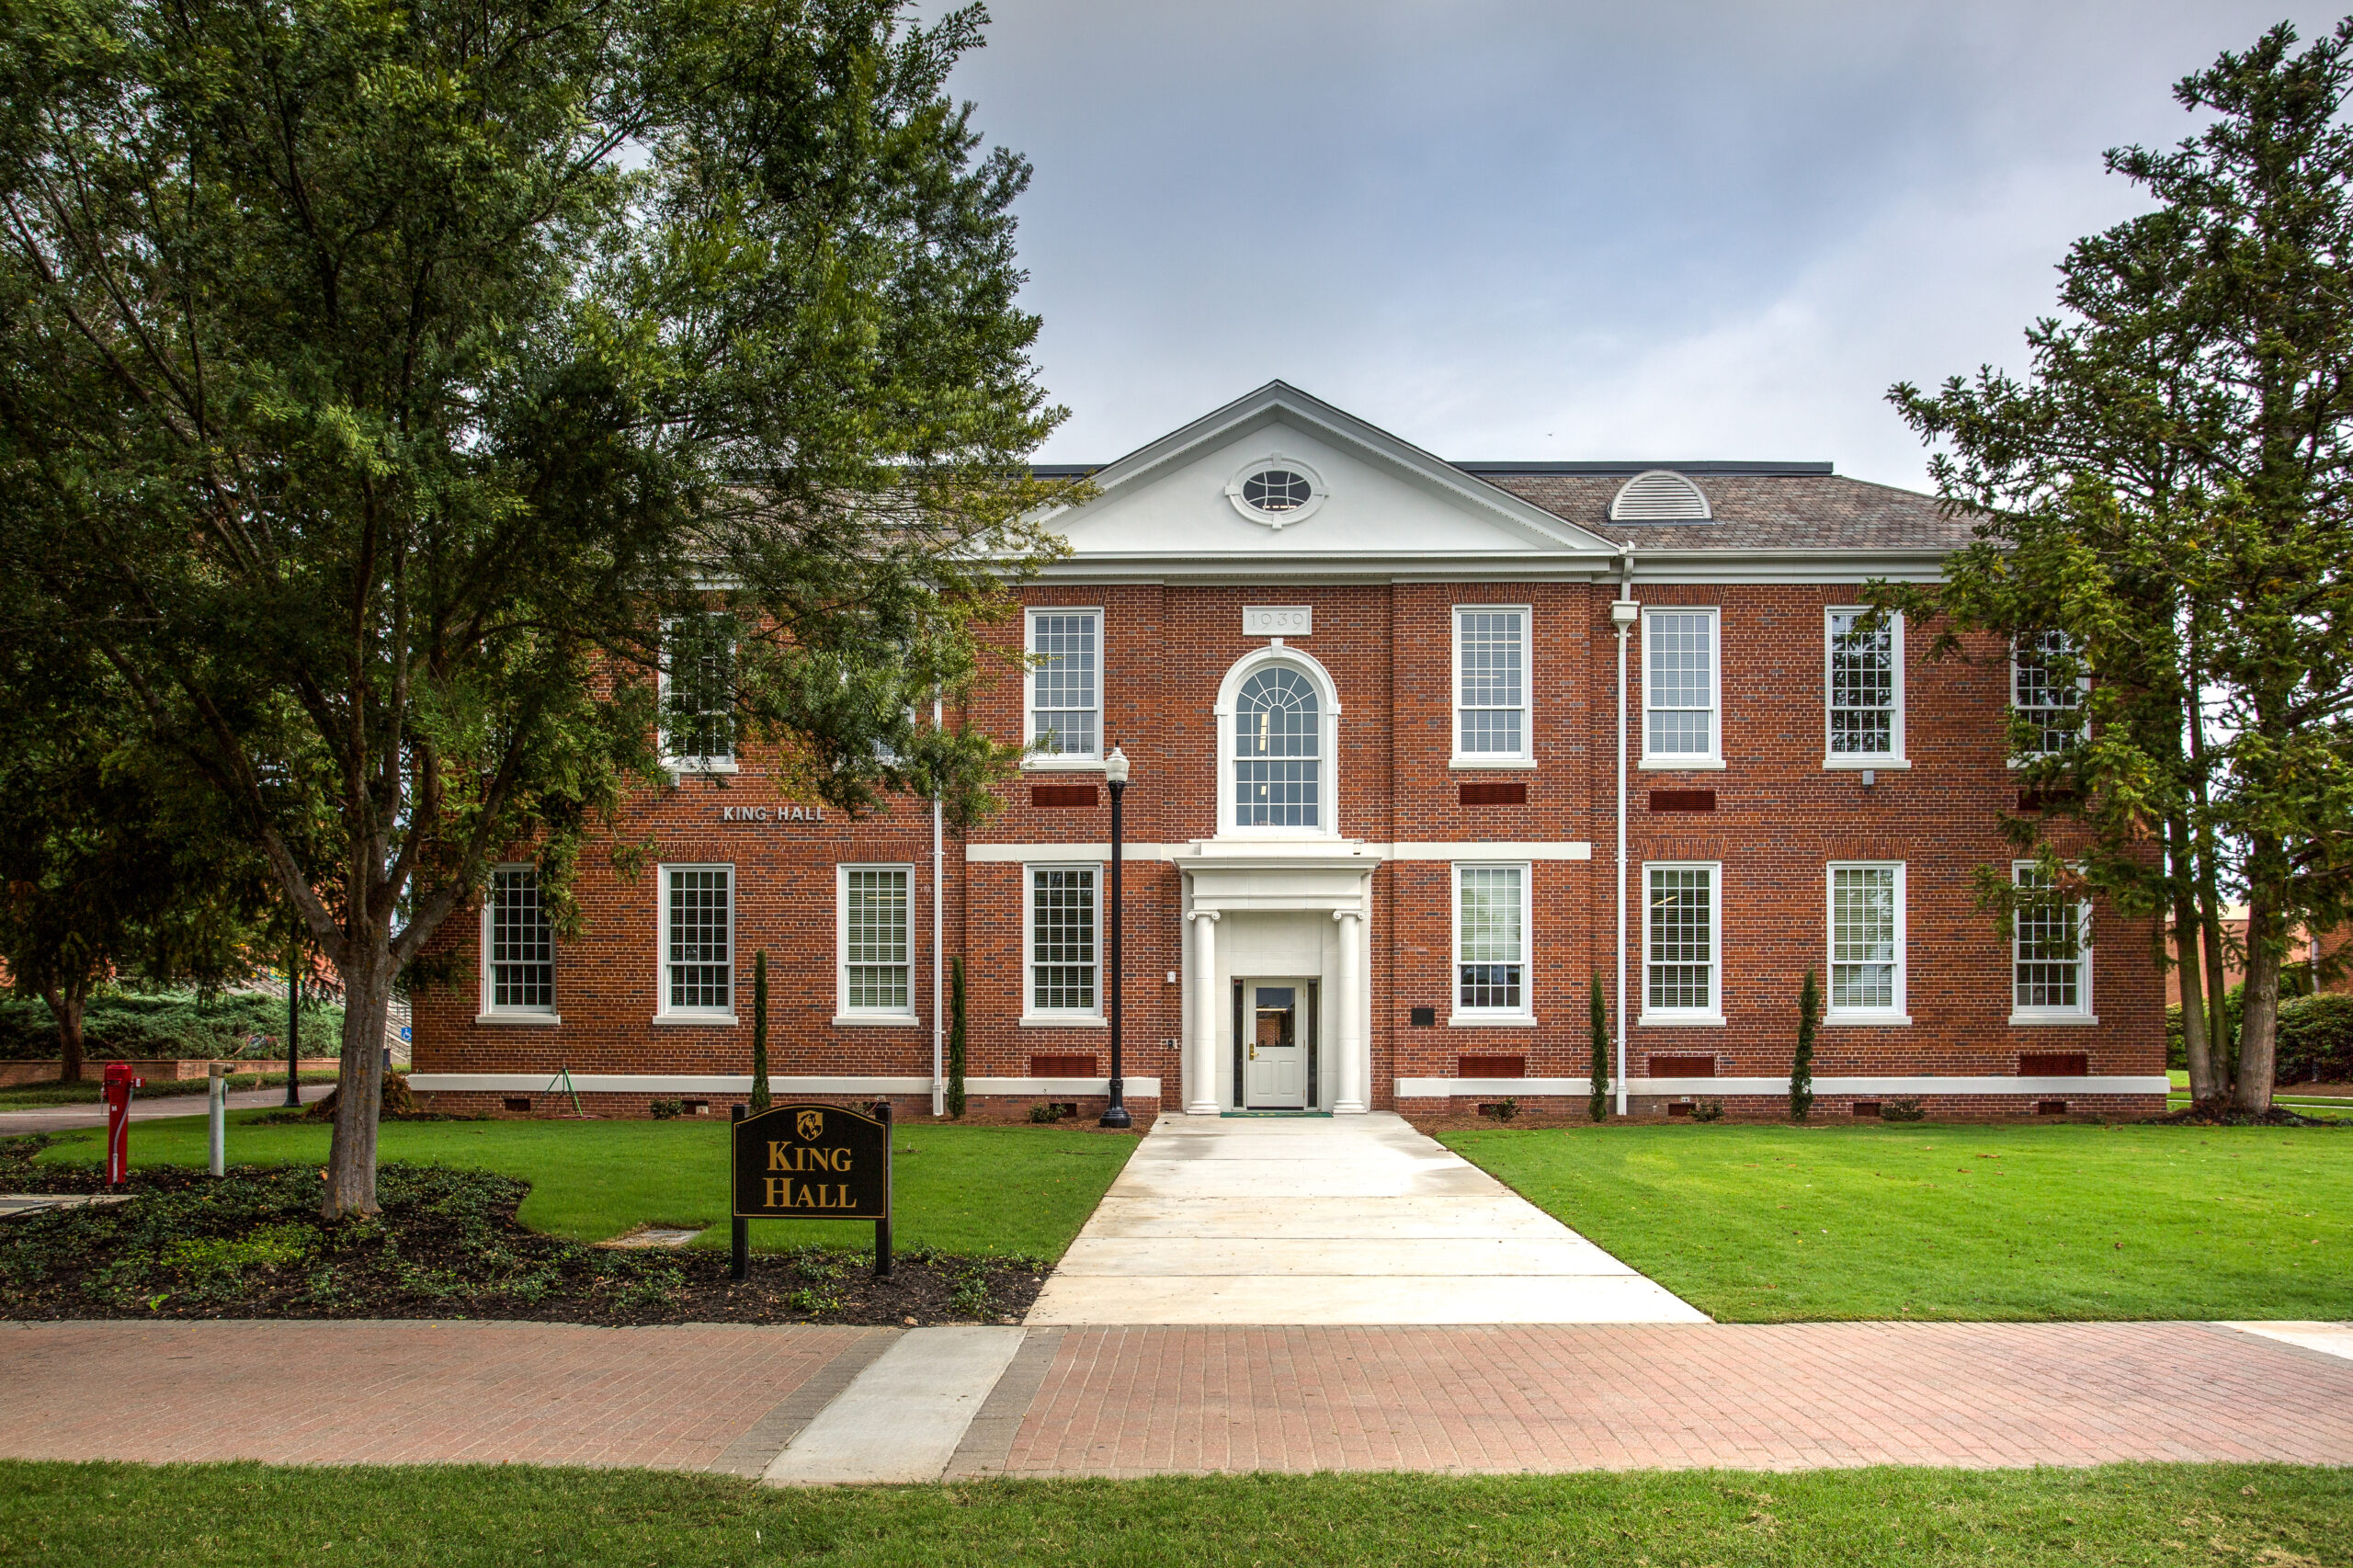 King Hall Project at Abraham Baldwin Agricultural College Wins “Excellence in Rehabilitation” Award from The Georgia Trust for Historic Preservation